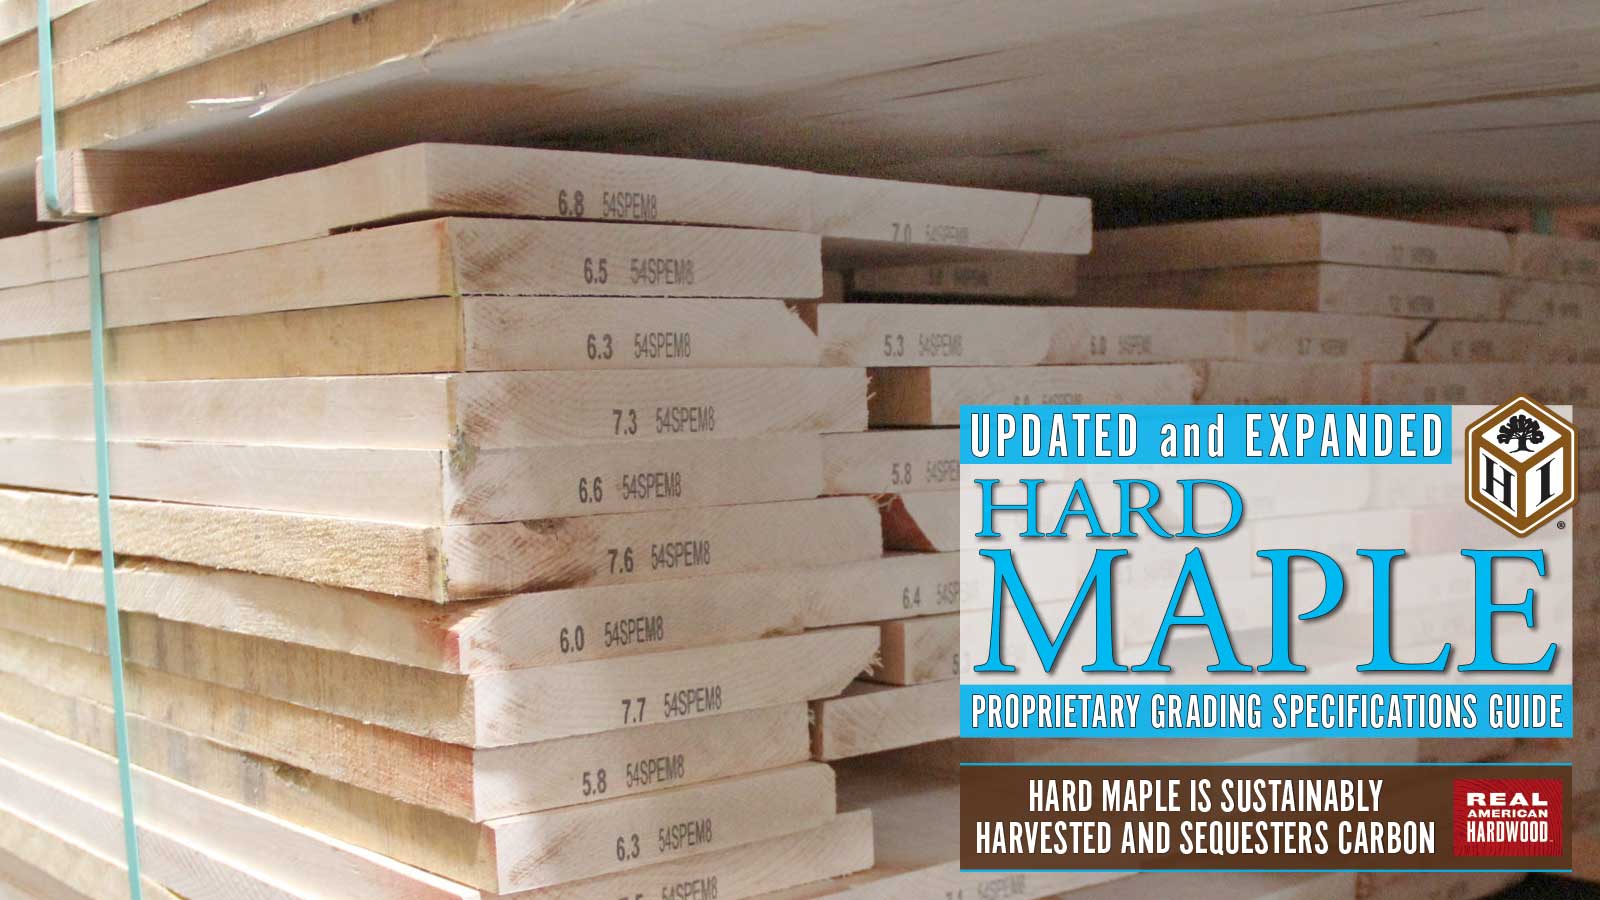 NEW! Expanded and Updated Hard Maple Lumber Guide